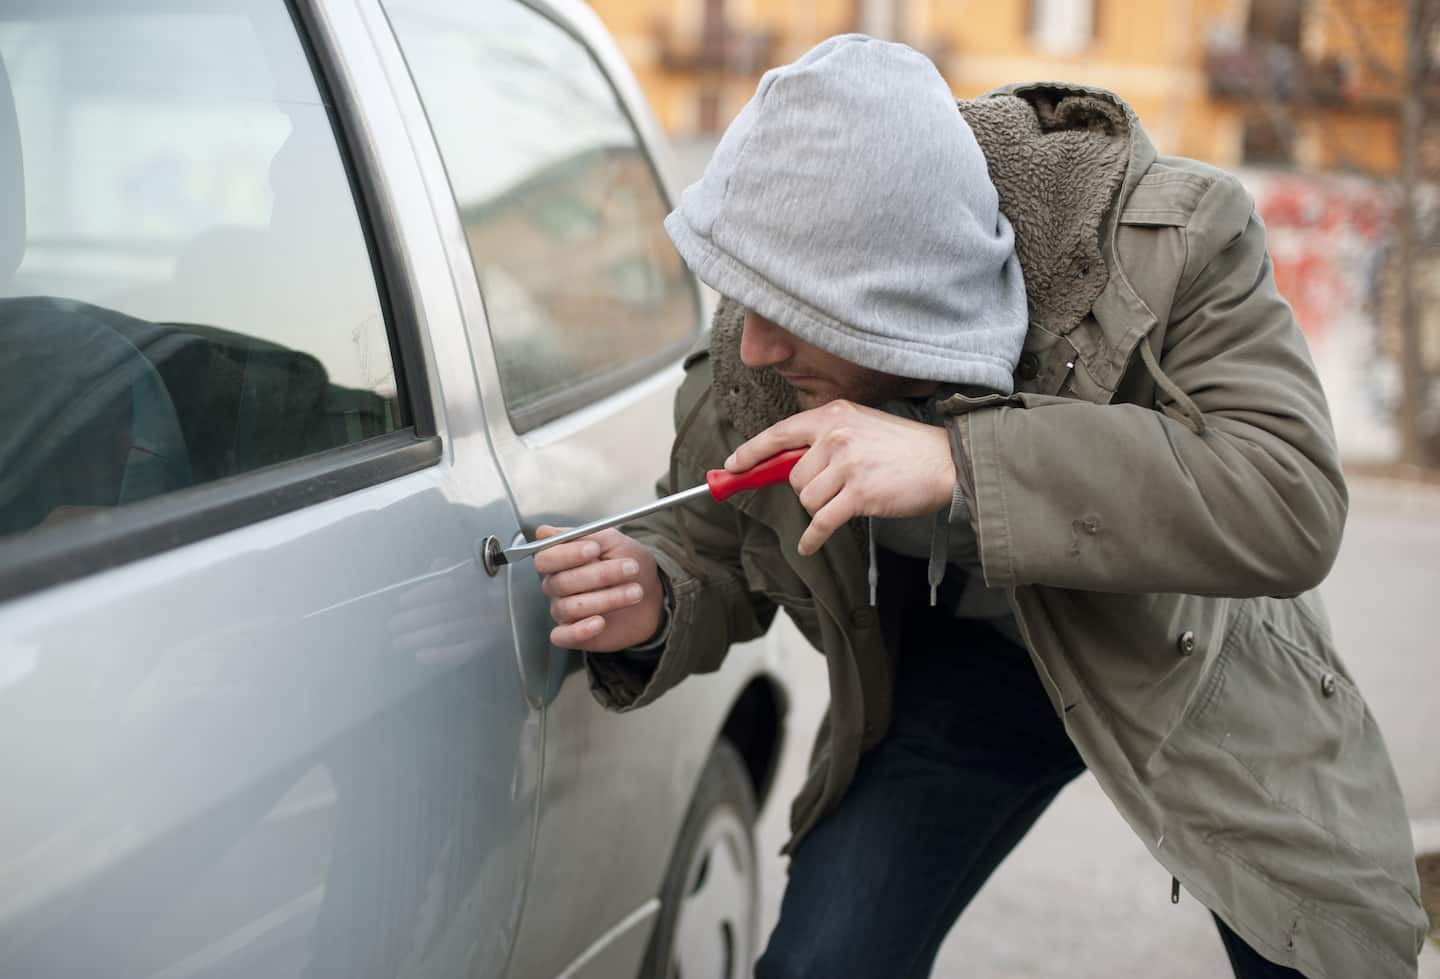 Cases of vehicle theft are increasing in Mauricie